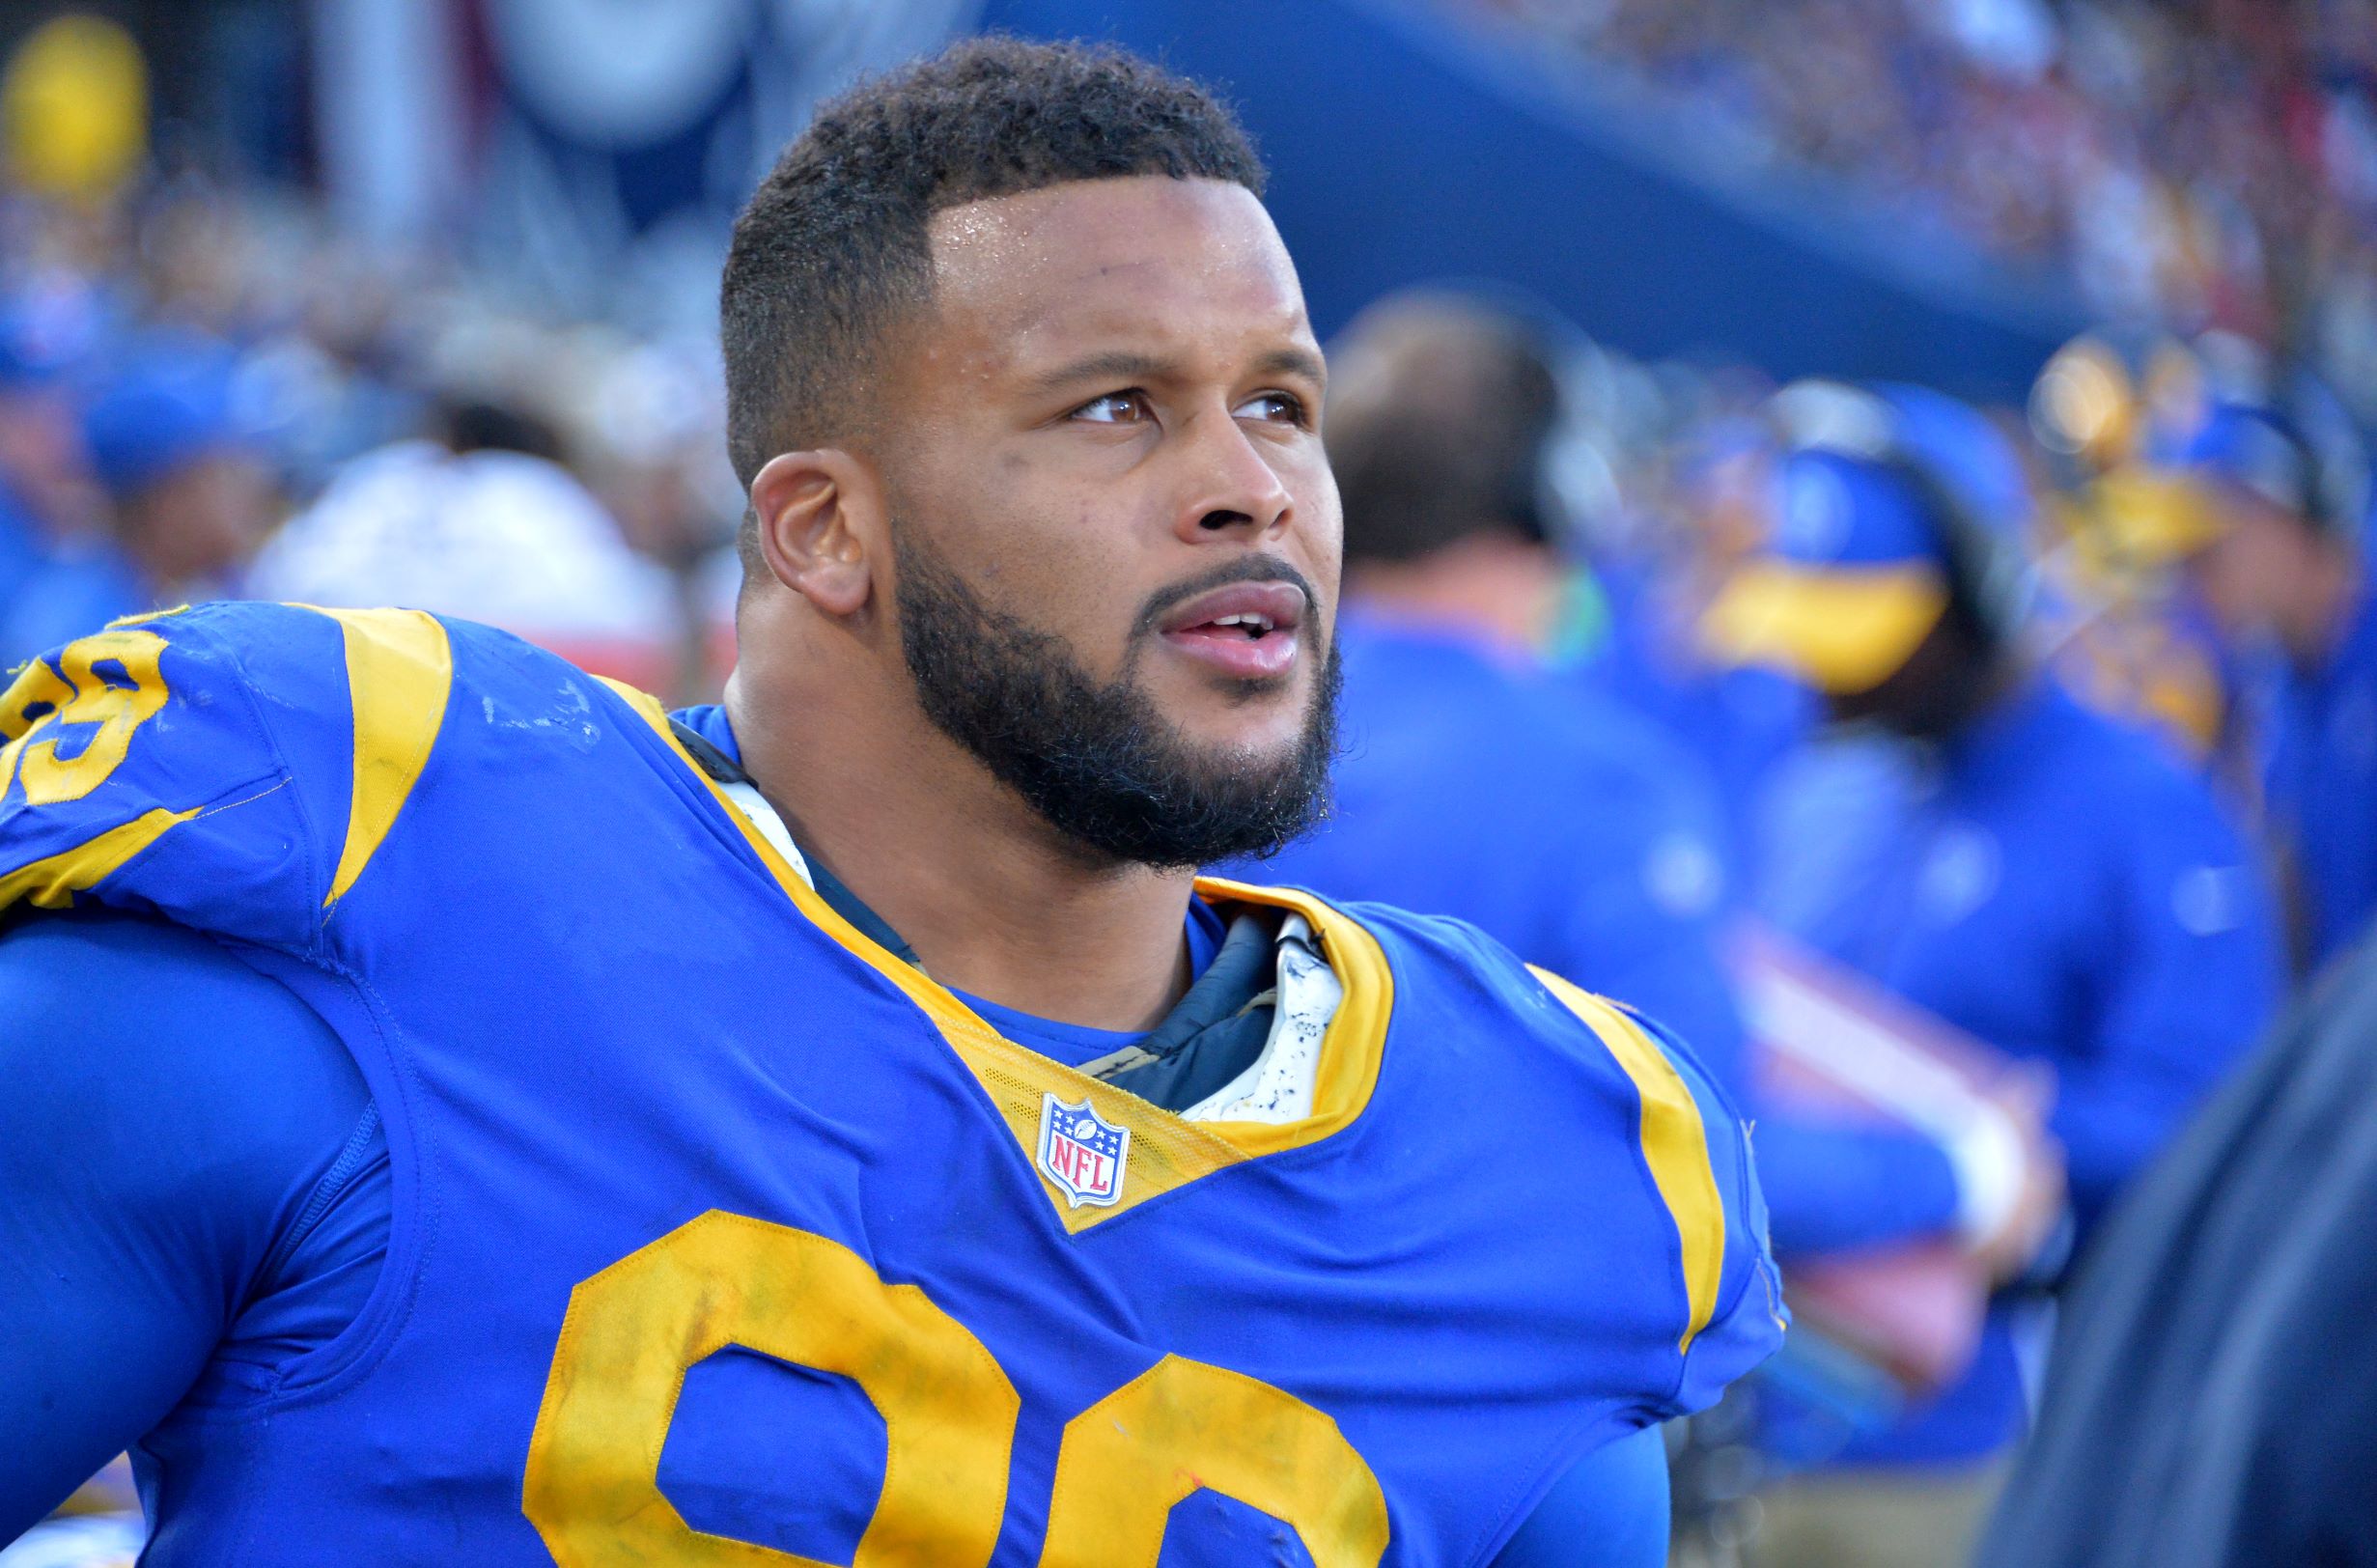 Aaron Donald of the Rams Named No. 1 In NFL's Top 100 Players List, Tom  Brady Drops to No. 6 - Maxim